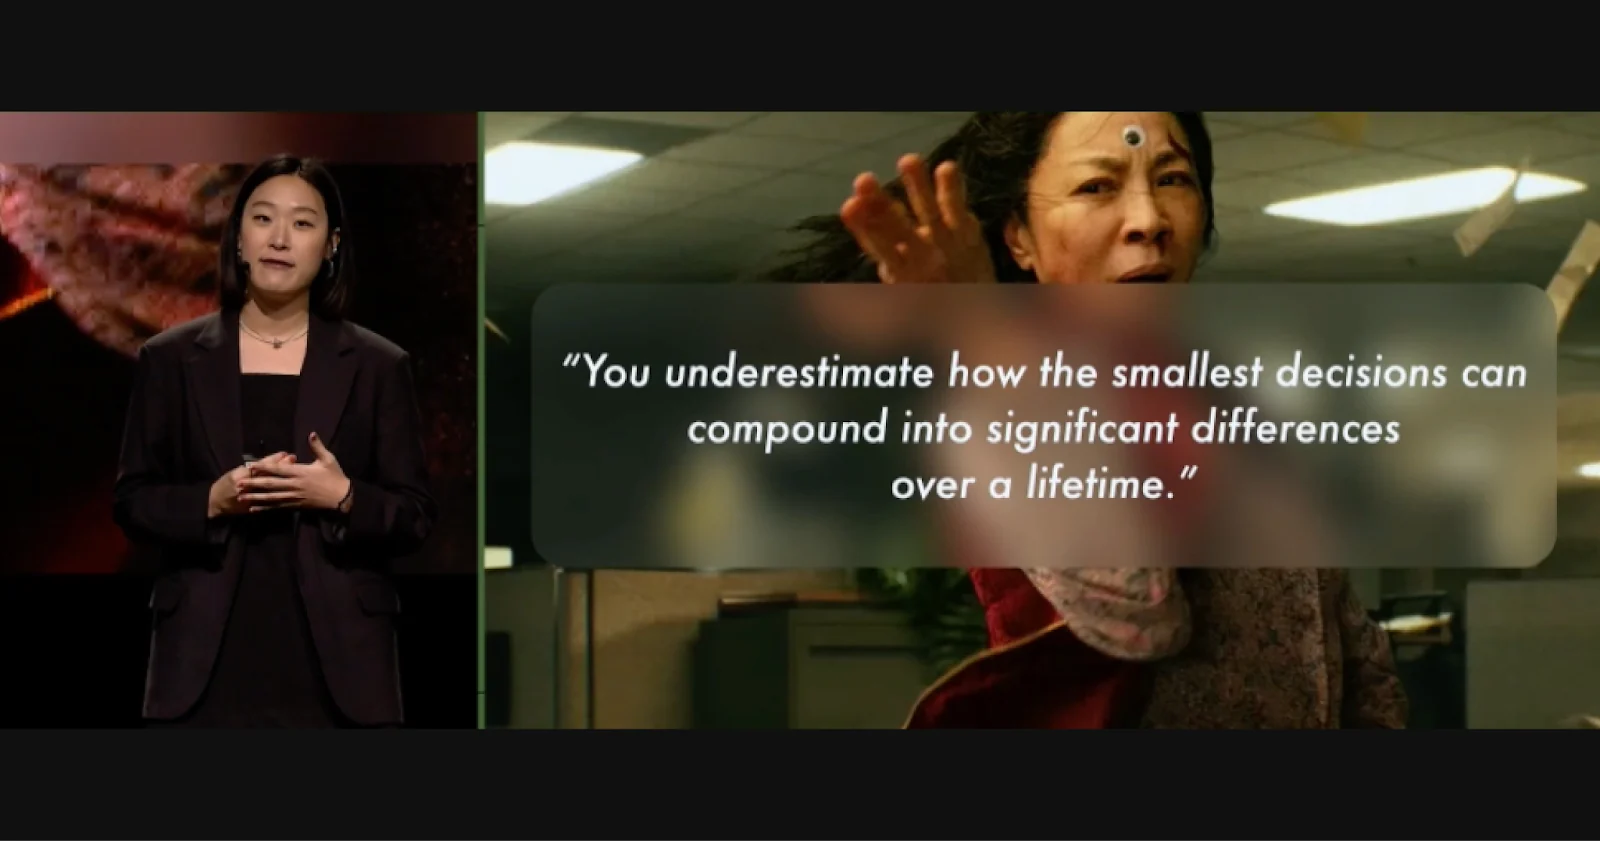 Movie quote: "You underestimate how the smallest decisions can compound into significant differences over a lifetime."